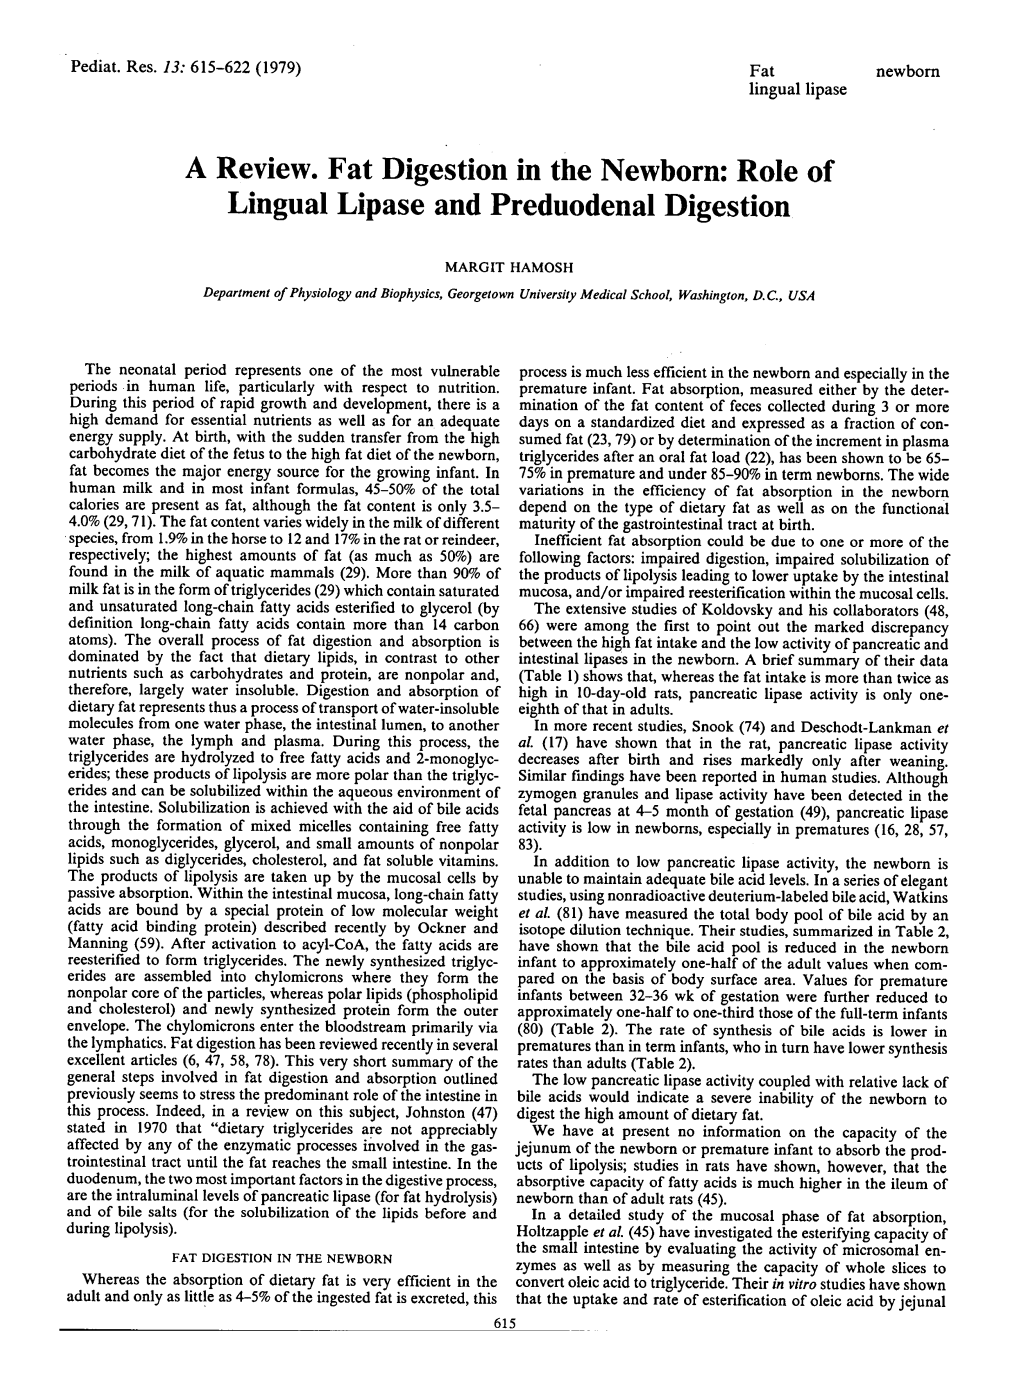 A Review. Fat Digestion in the Newborn: Role of Lingual Lipase and Preduodenal Digestion